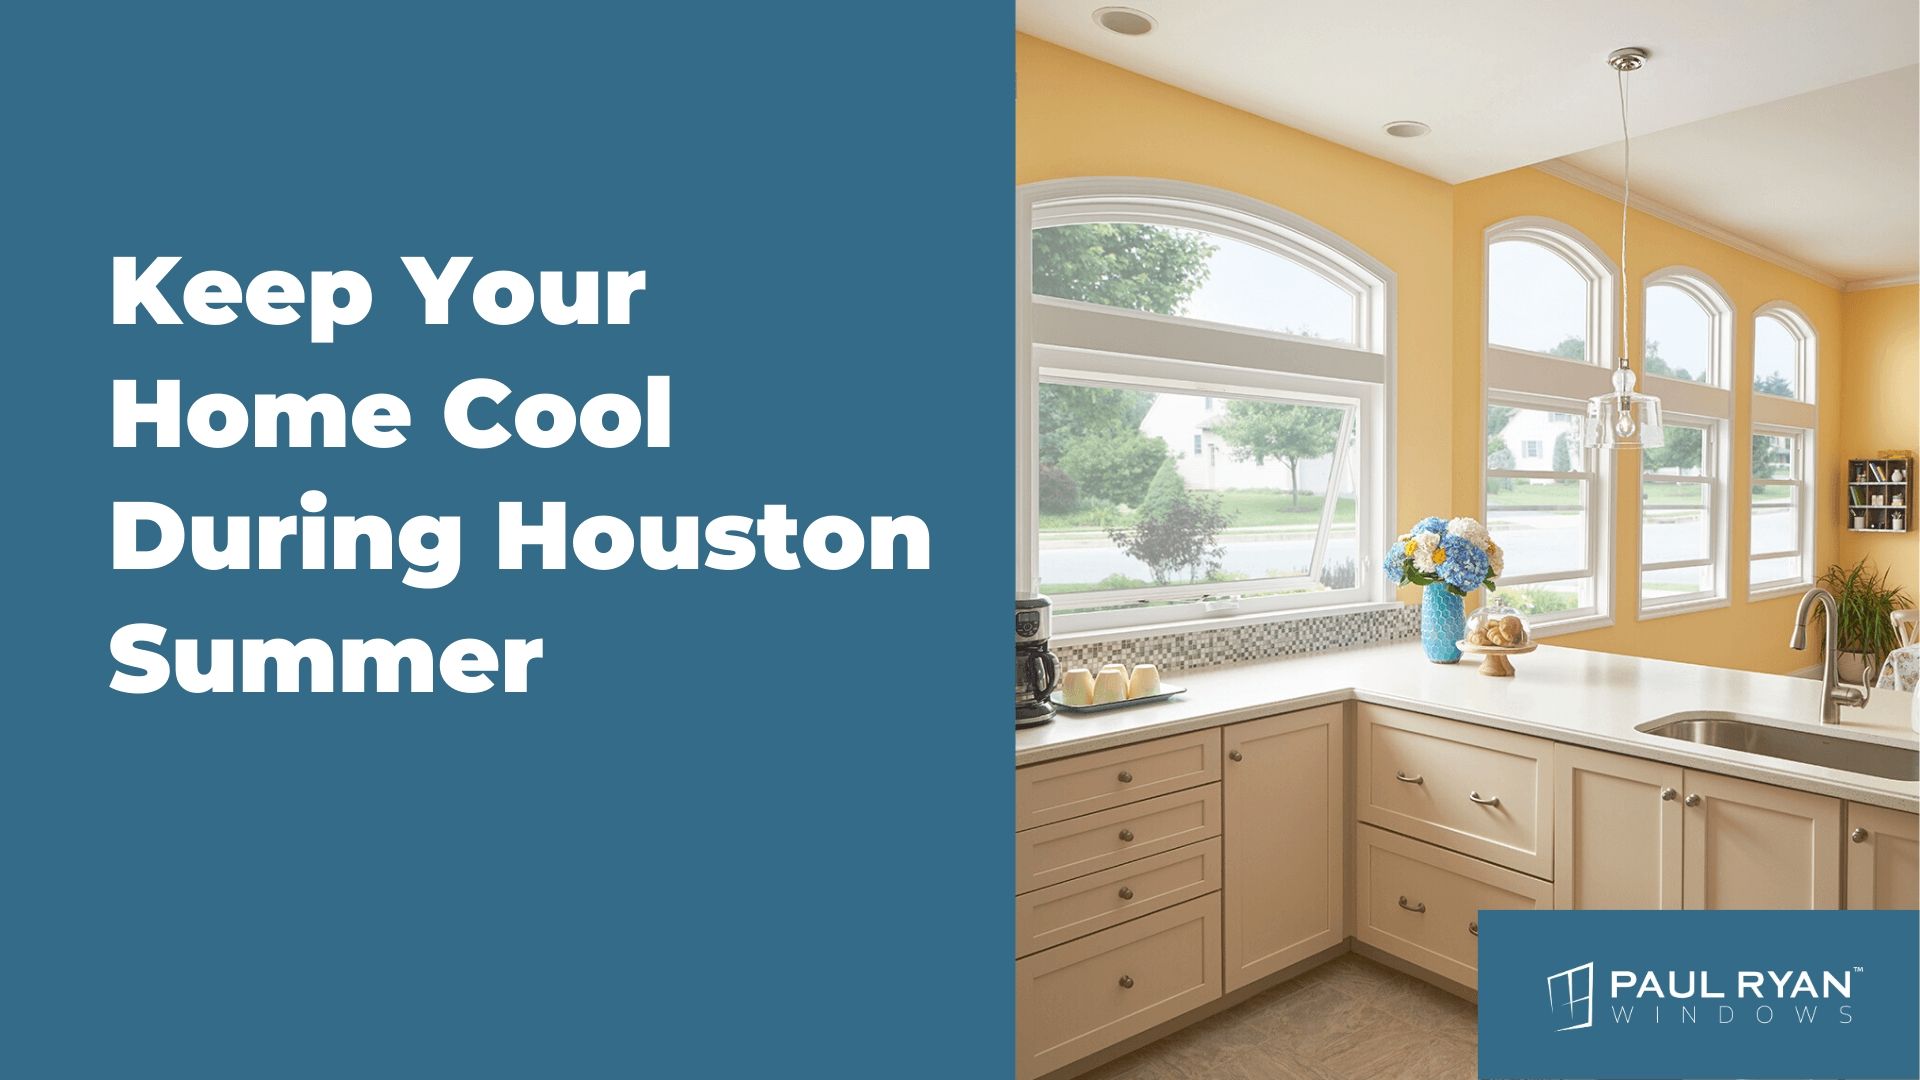 Keep Your Home Cool During Houston Summer